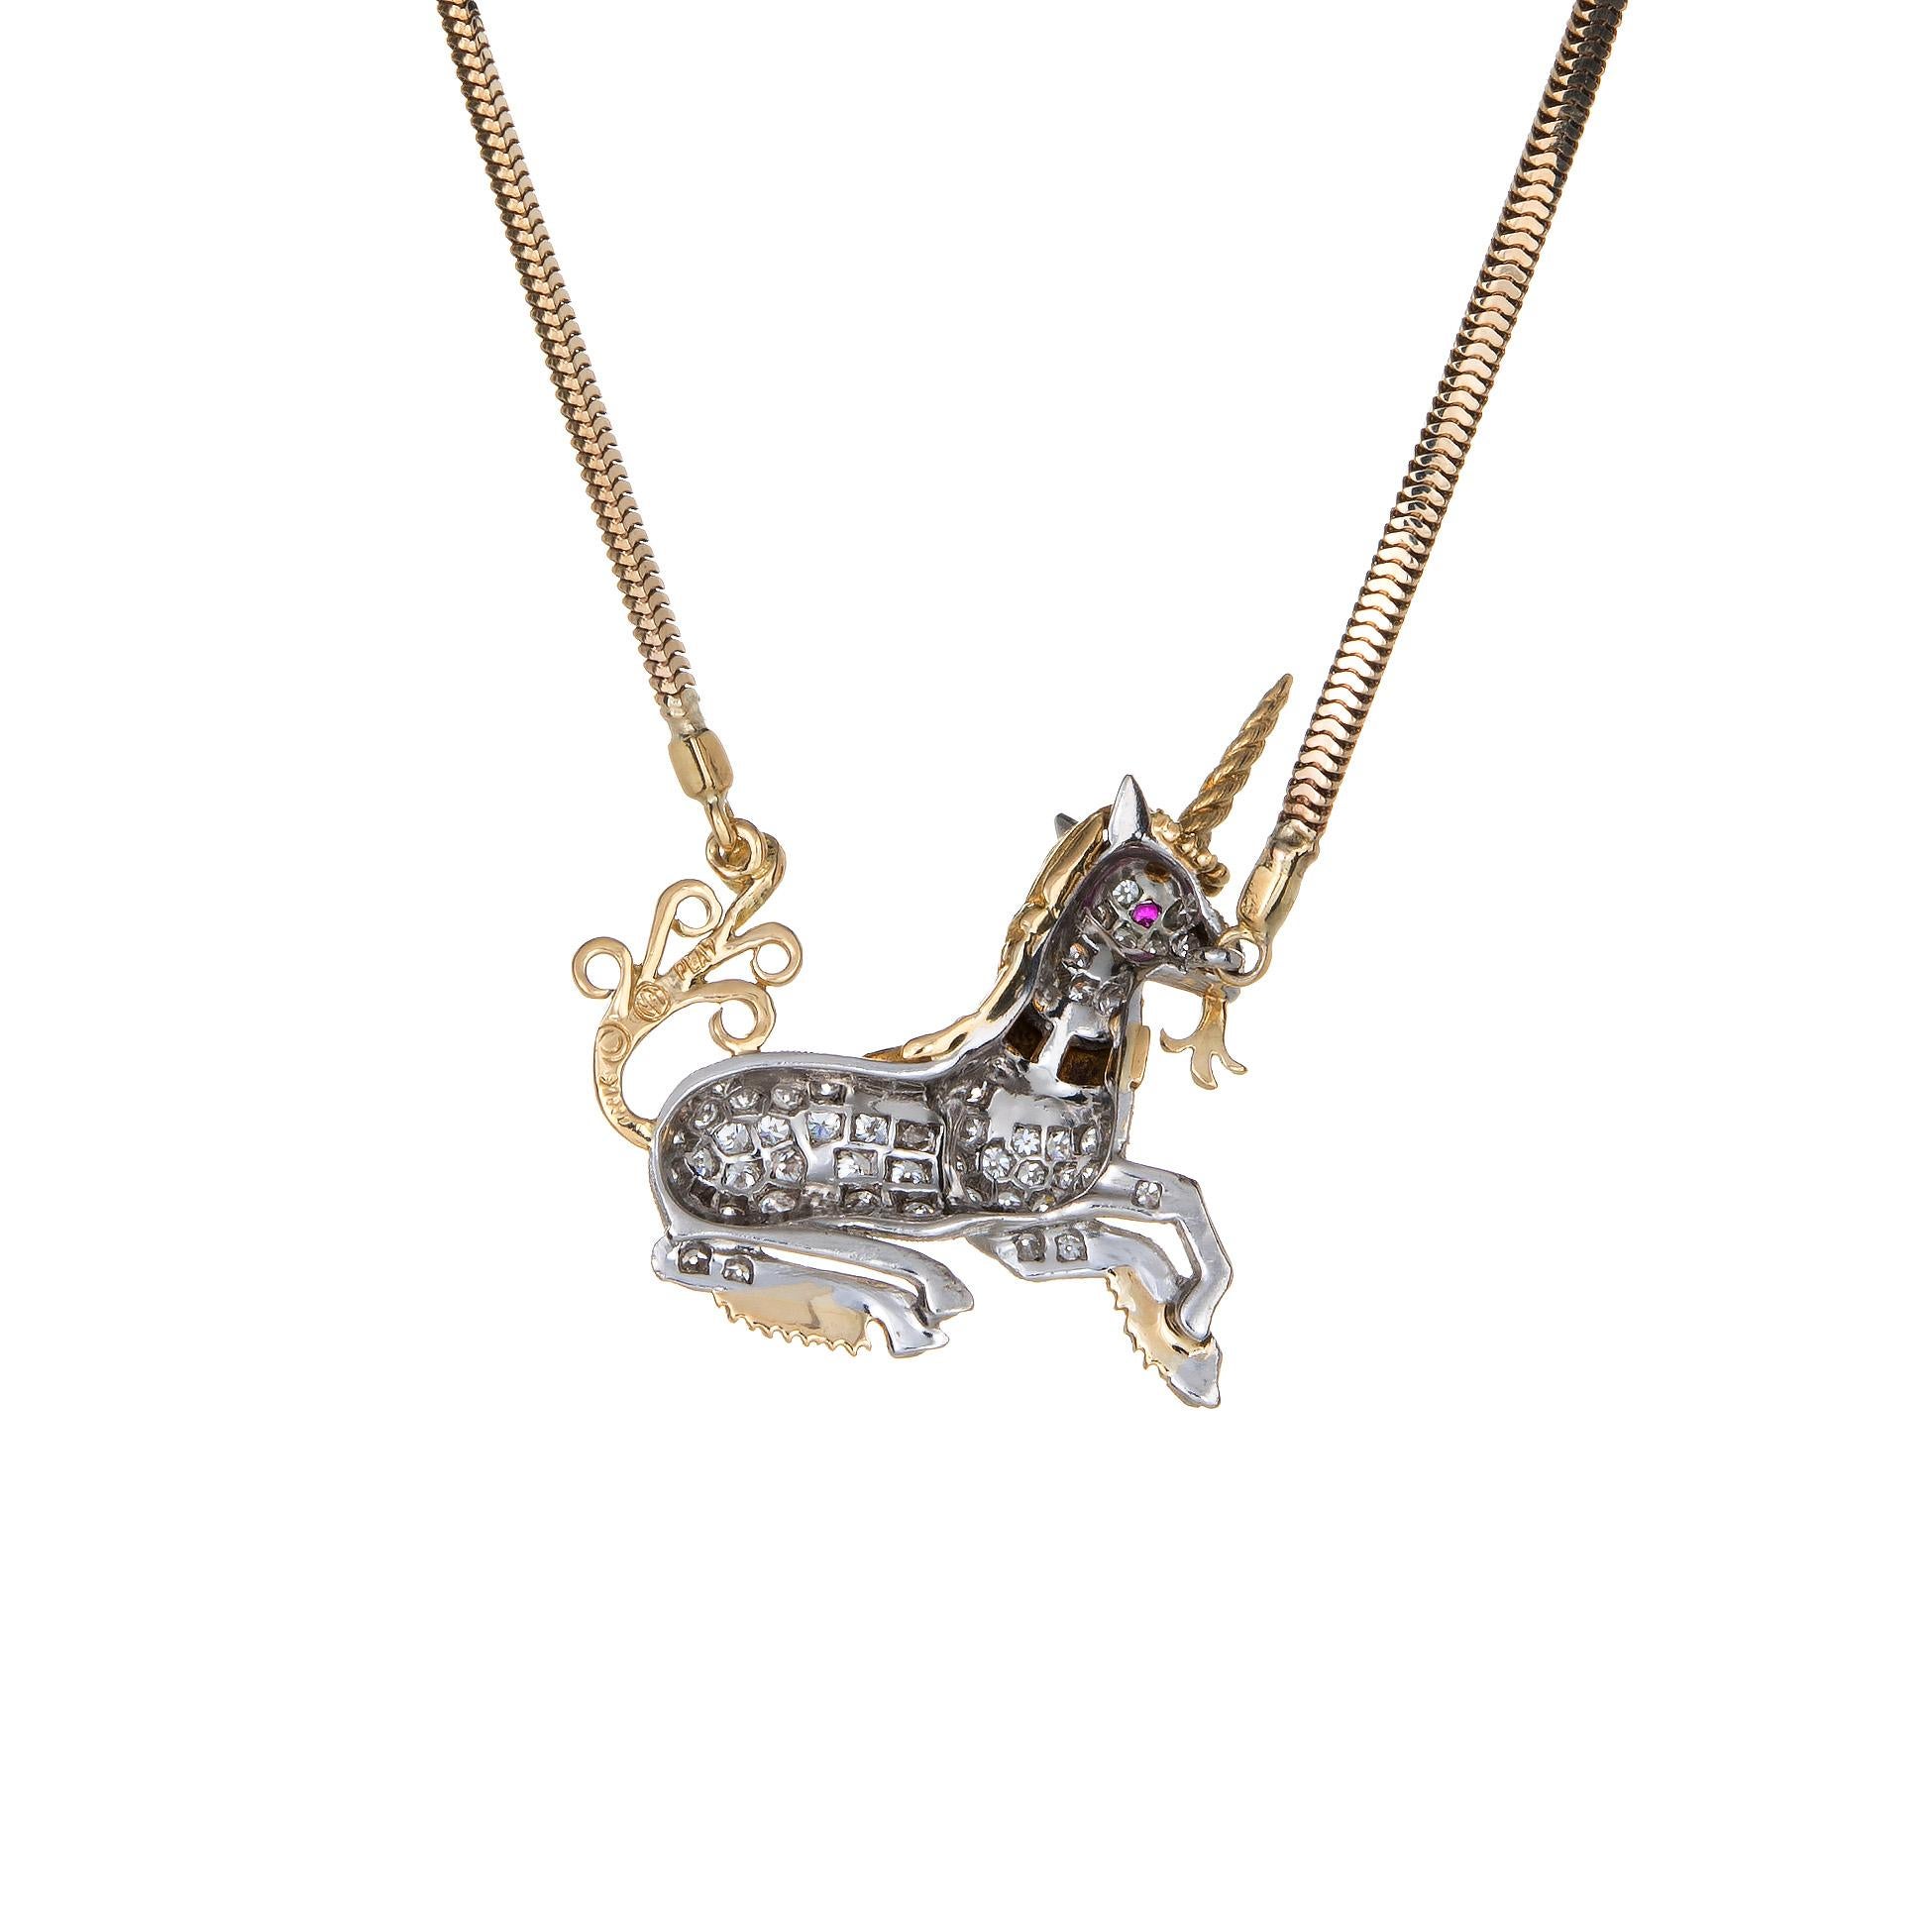 1st Installment.  Finely detailed vintage Mc Teigue unicorn necklace crafted in 900 platinum and 18k yellow gold and 14k yellow gold (chain). 

Diamonds are pave set into the mount and total an estimated 0.50 carats (estimated at G-H color and VS1-2